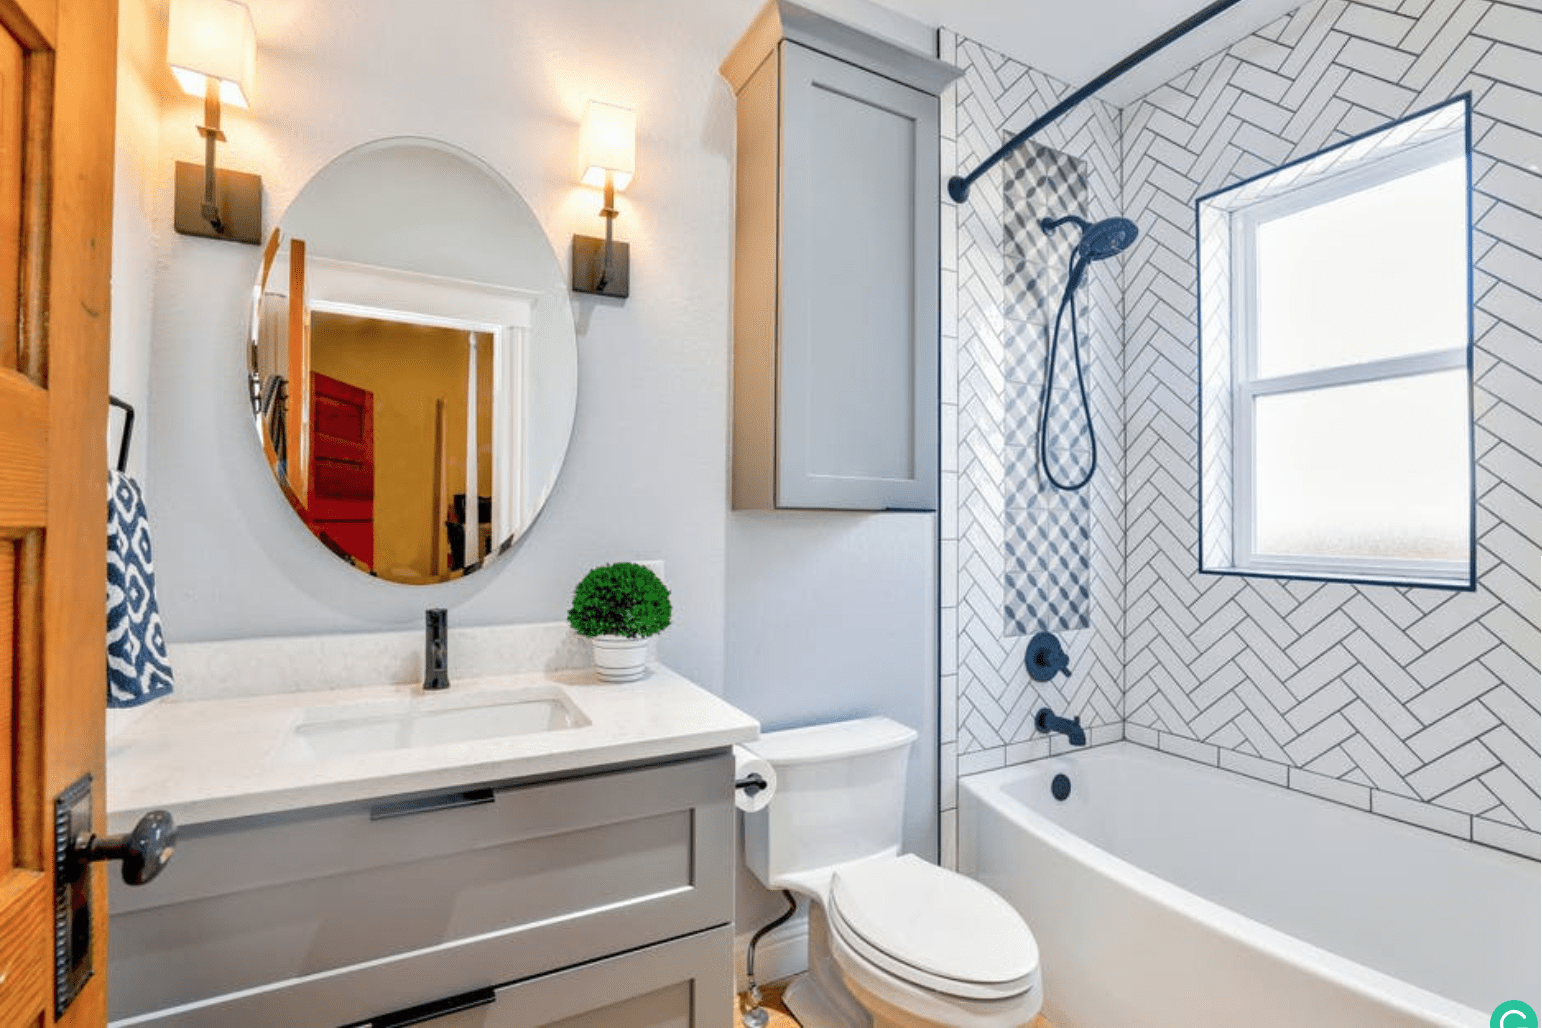 What is the best way to caulk a shower? - Clean Bathroom